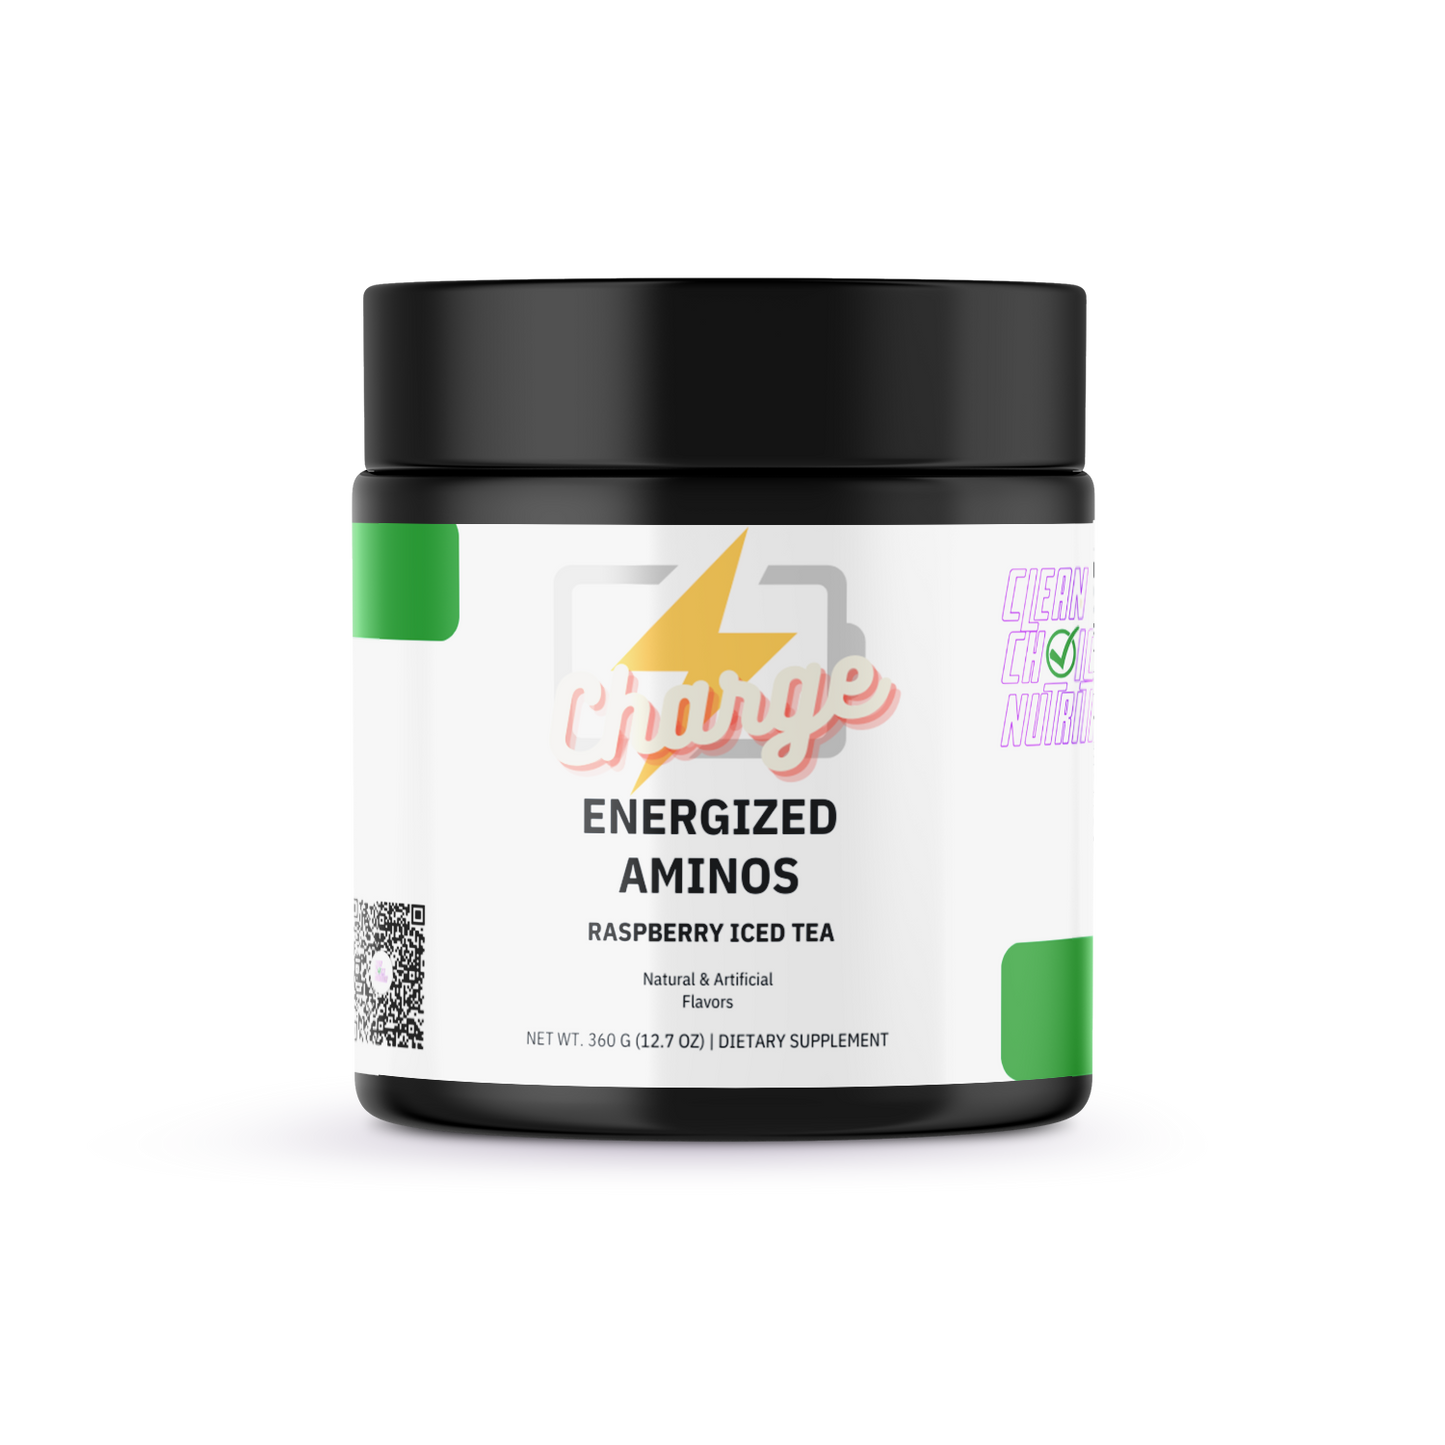 Charge - Energized Aminos (Raspberry Iced Tea)